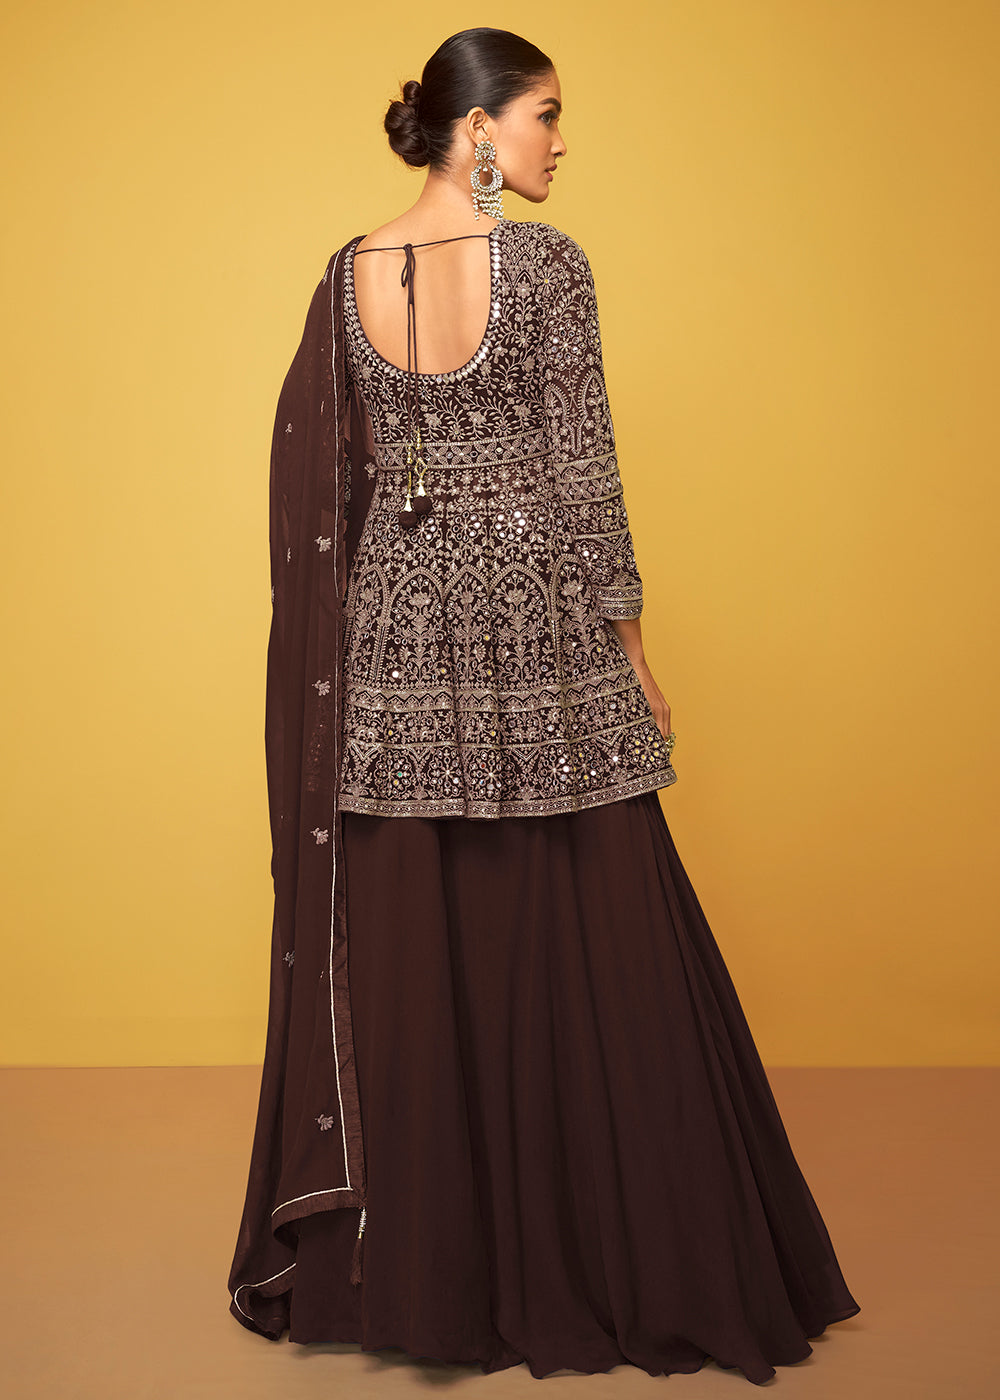 Buy Now Charming Brown Georgette Fabric Skirt Style Designer Palazzo Suit Online in USA, UK, Canada & Worldwide at Empress Clothing.